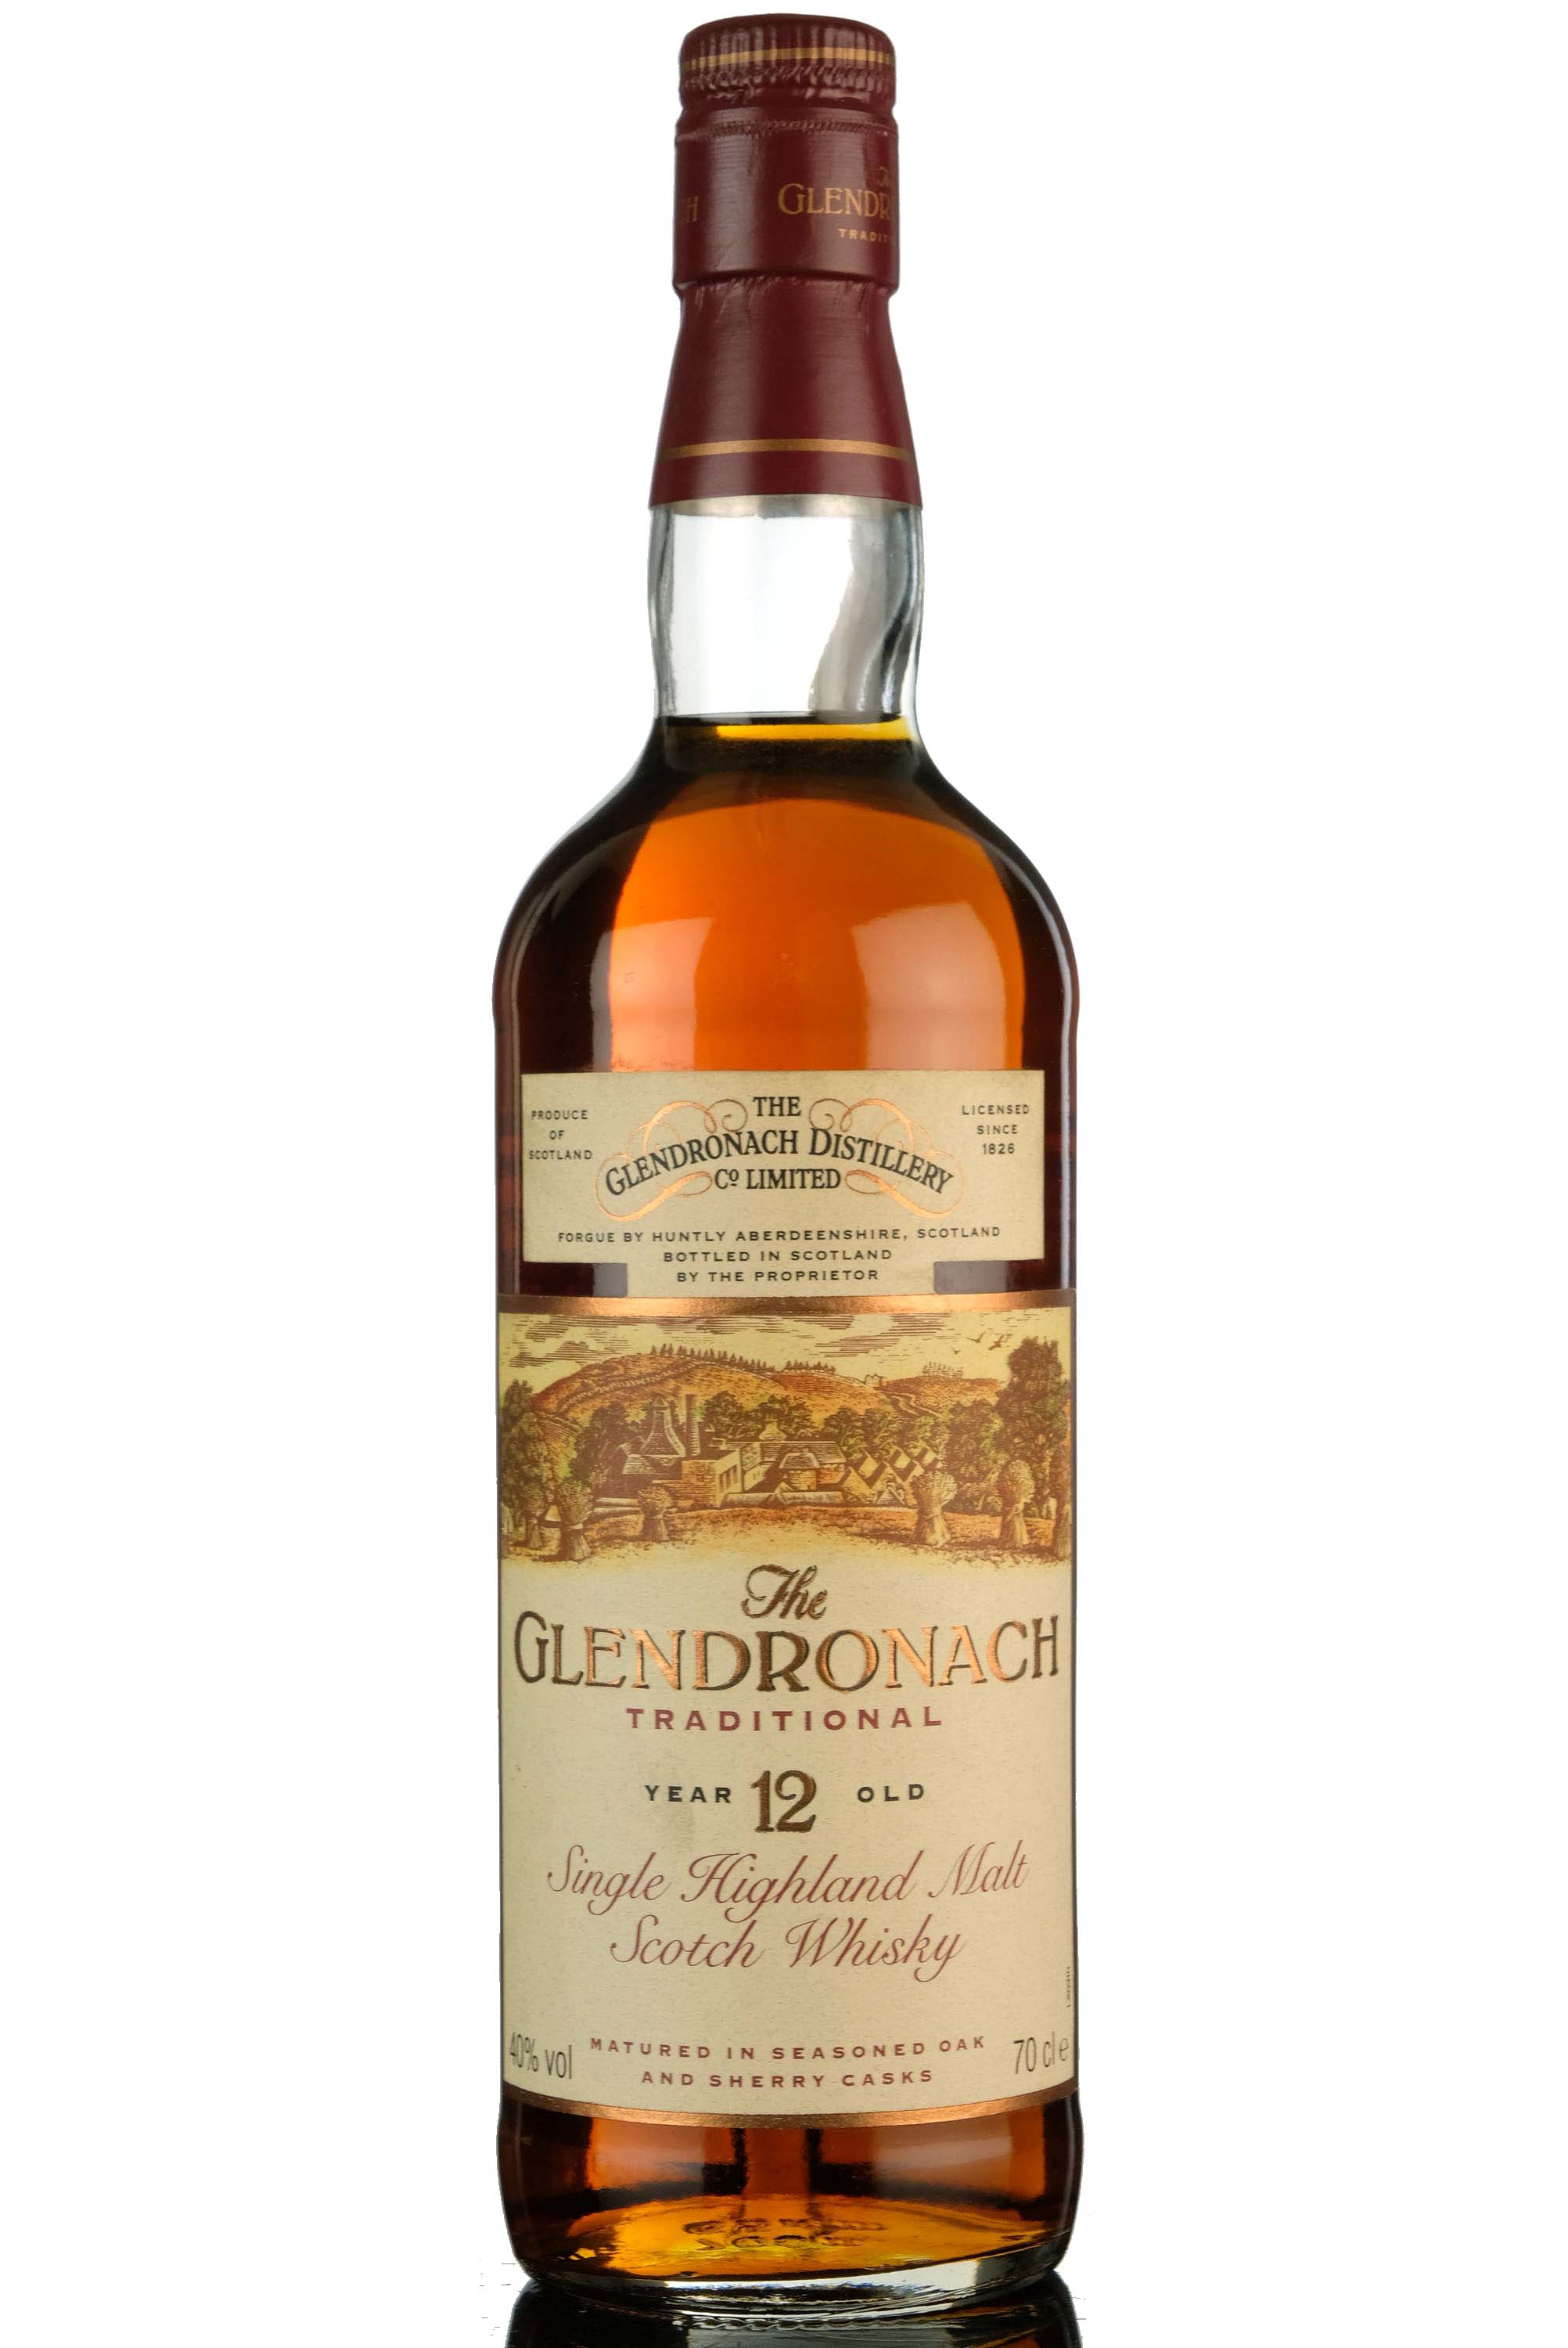 Glendronach 12 Year Old - Traditional - 1990s